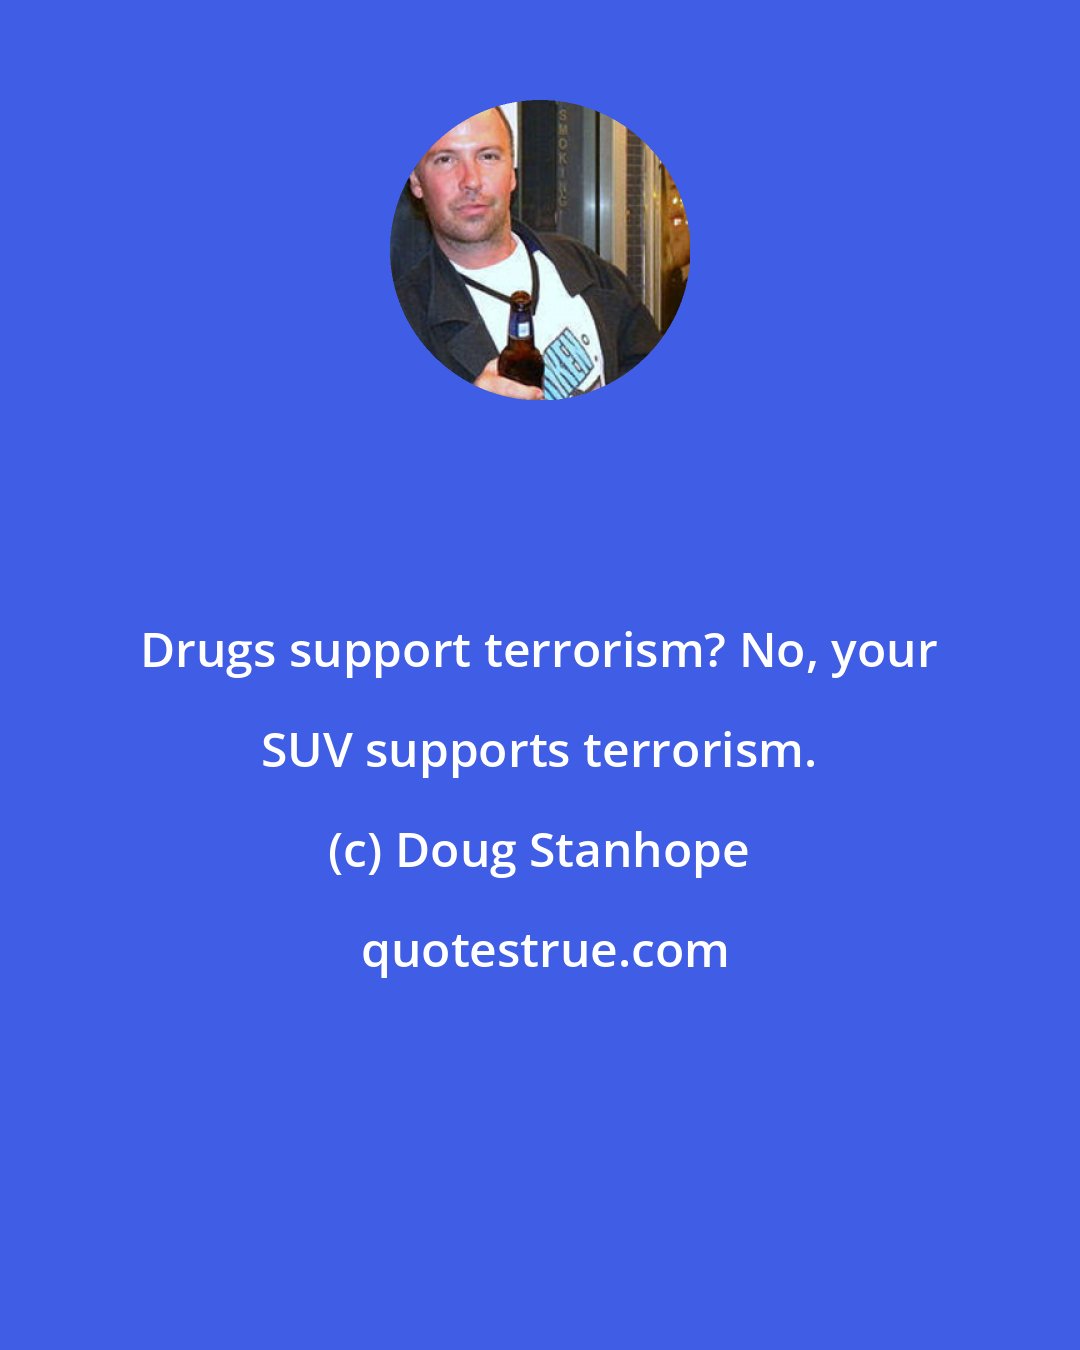 Doug Stanhope: Drugs support terrorism? No, your SUV supports terrorism.